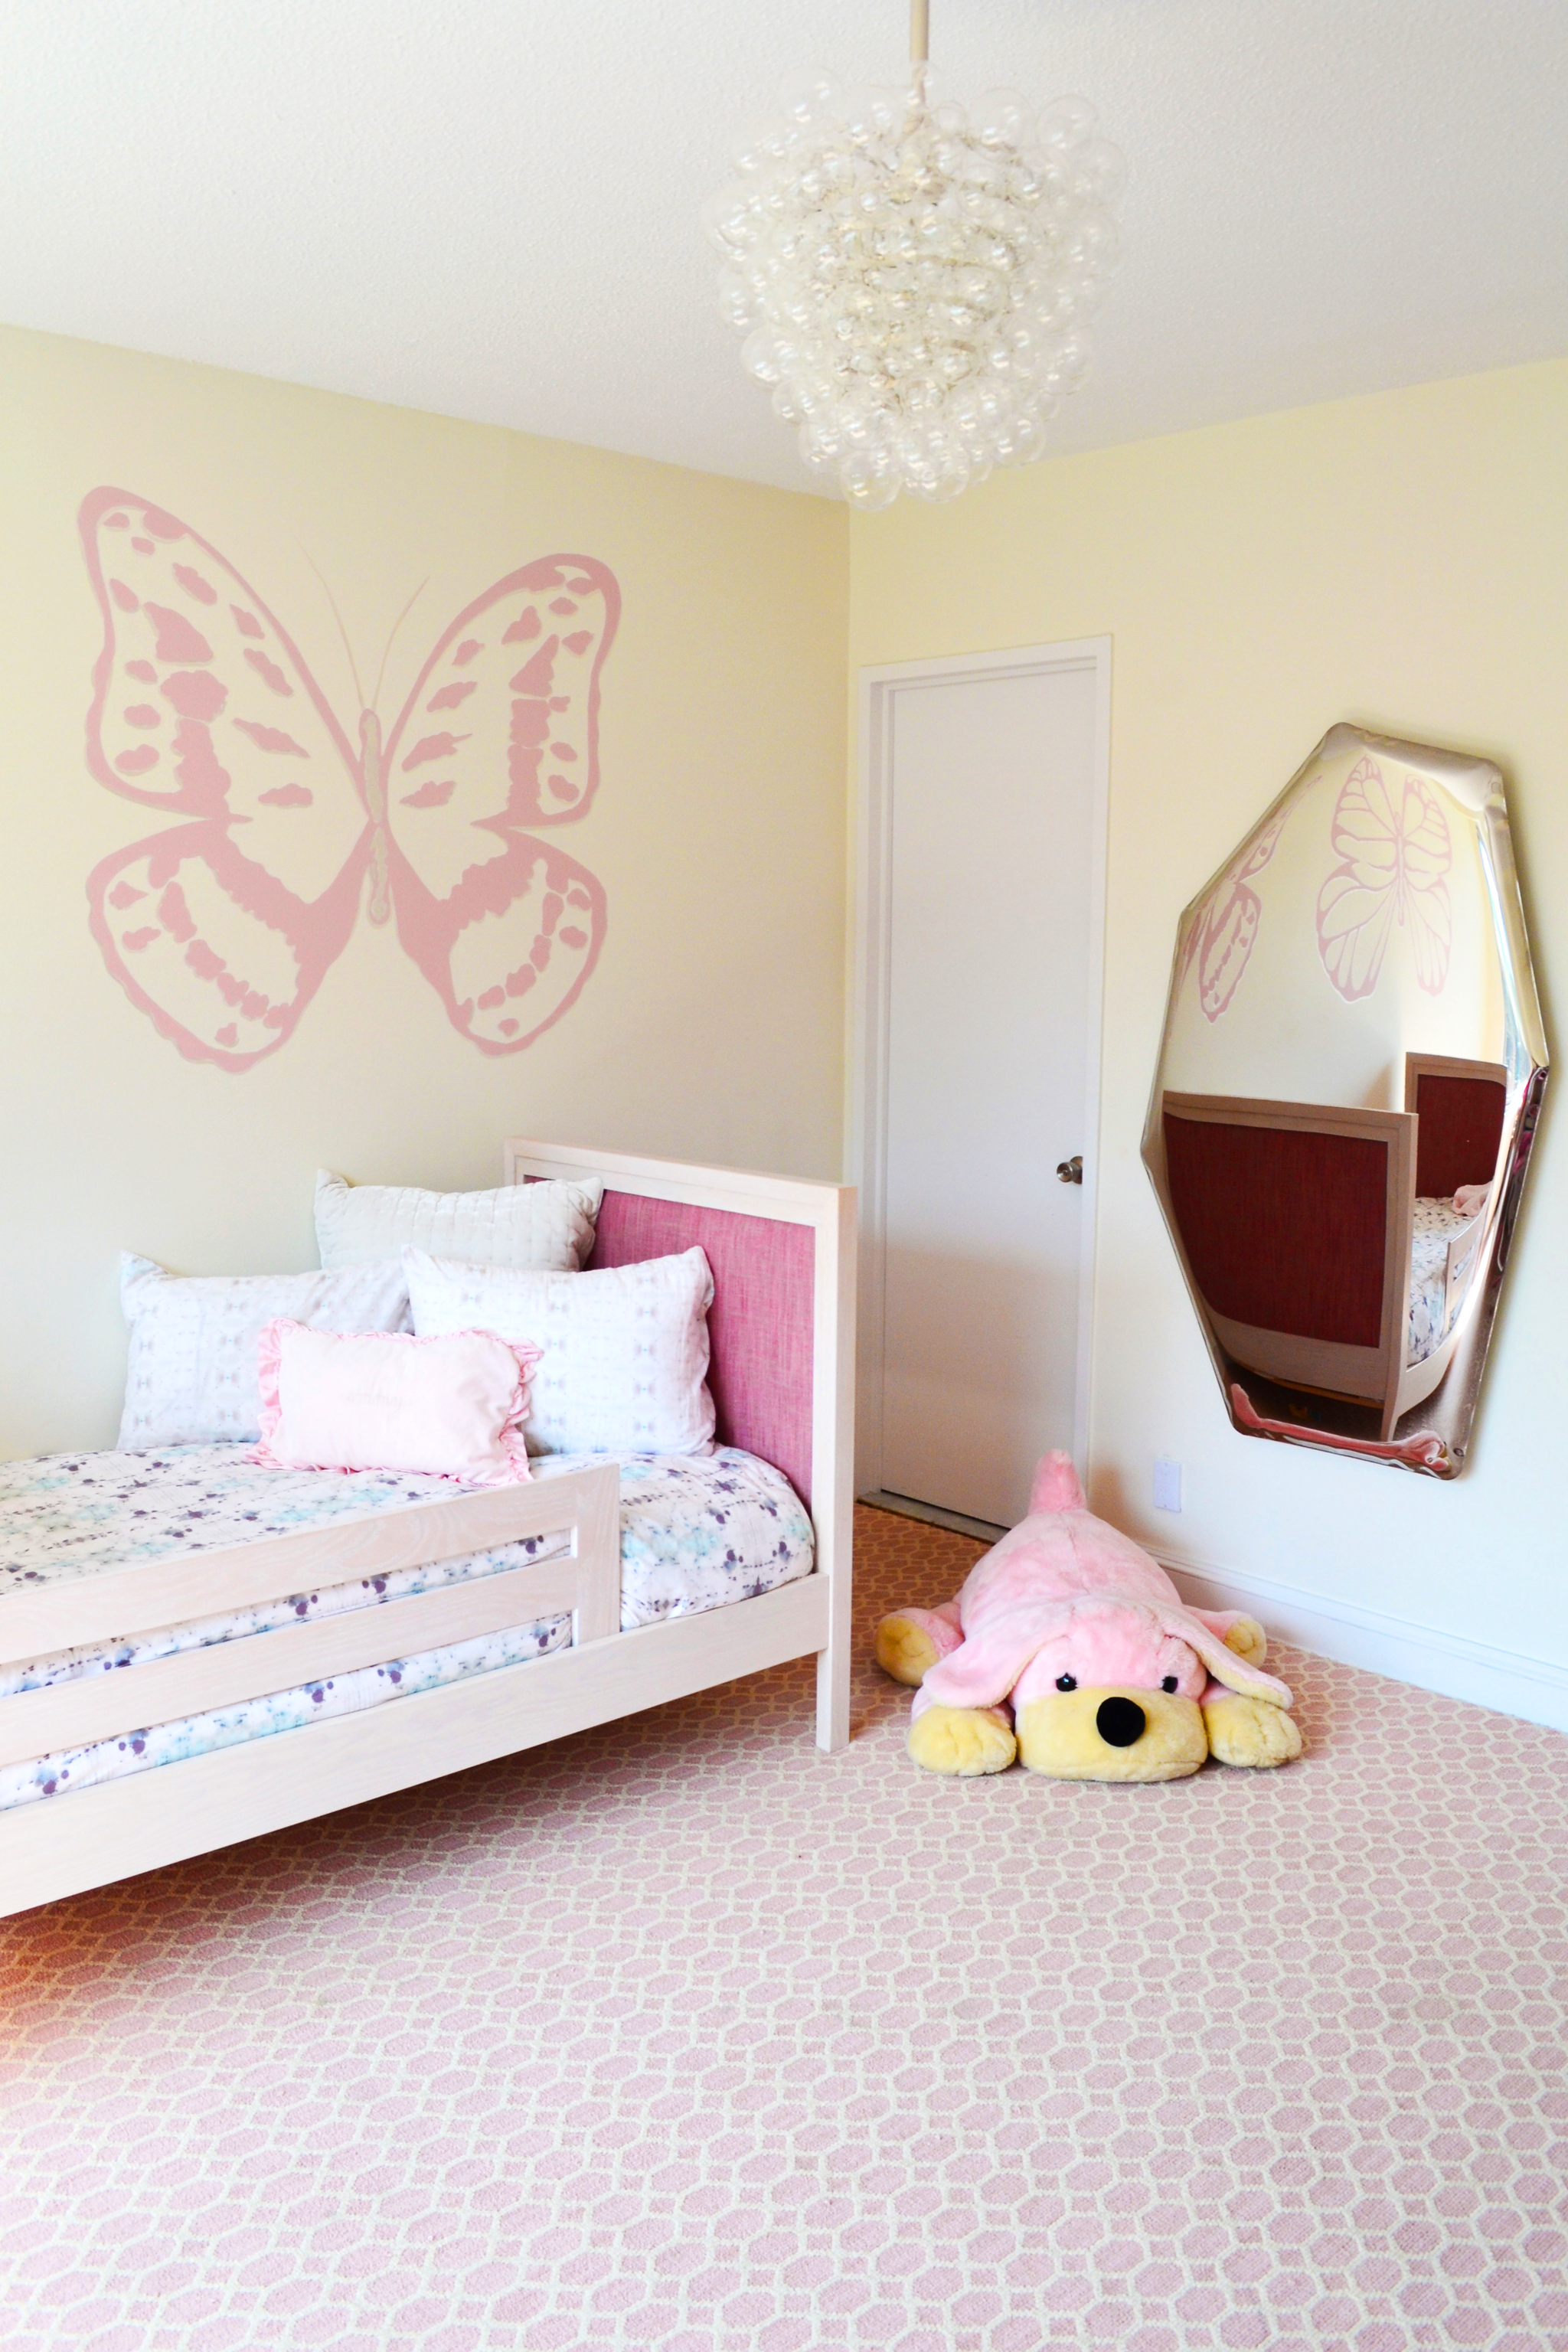 NYC Residence Blush Pink Hirst inspired Butterflies